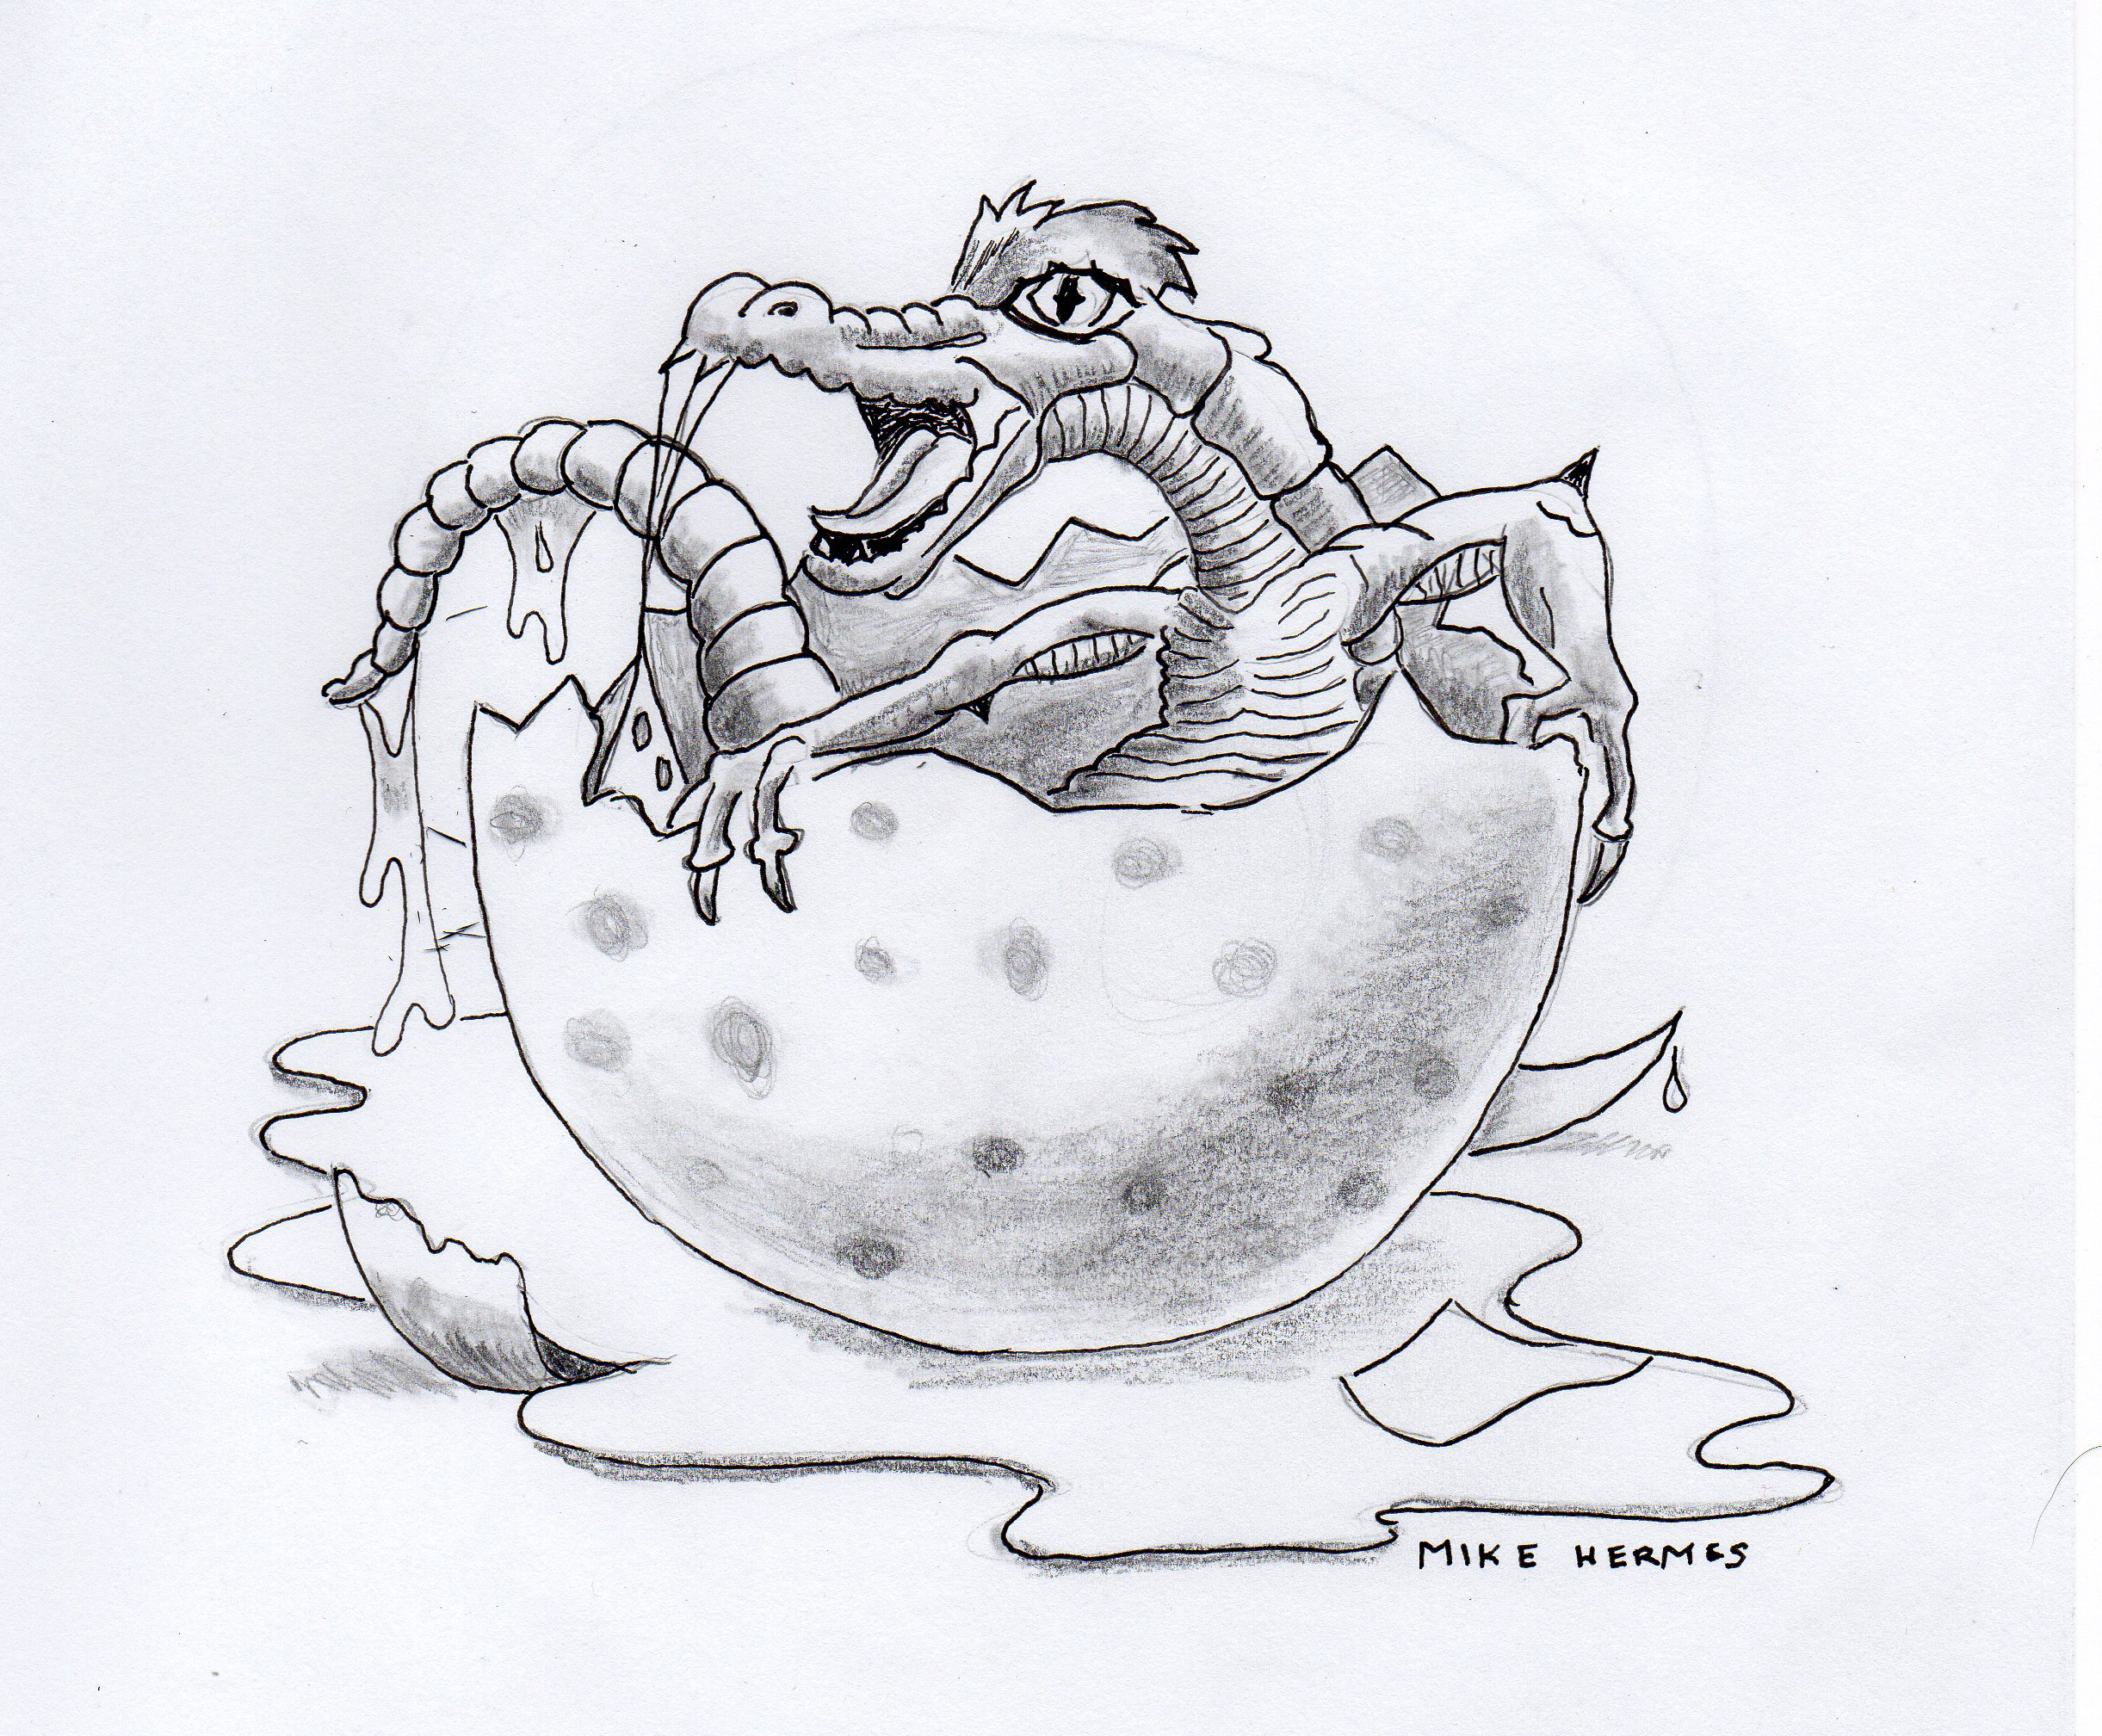 how to draw a baby dragon in a egg